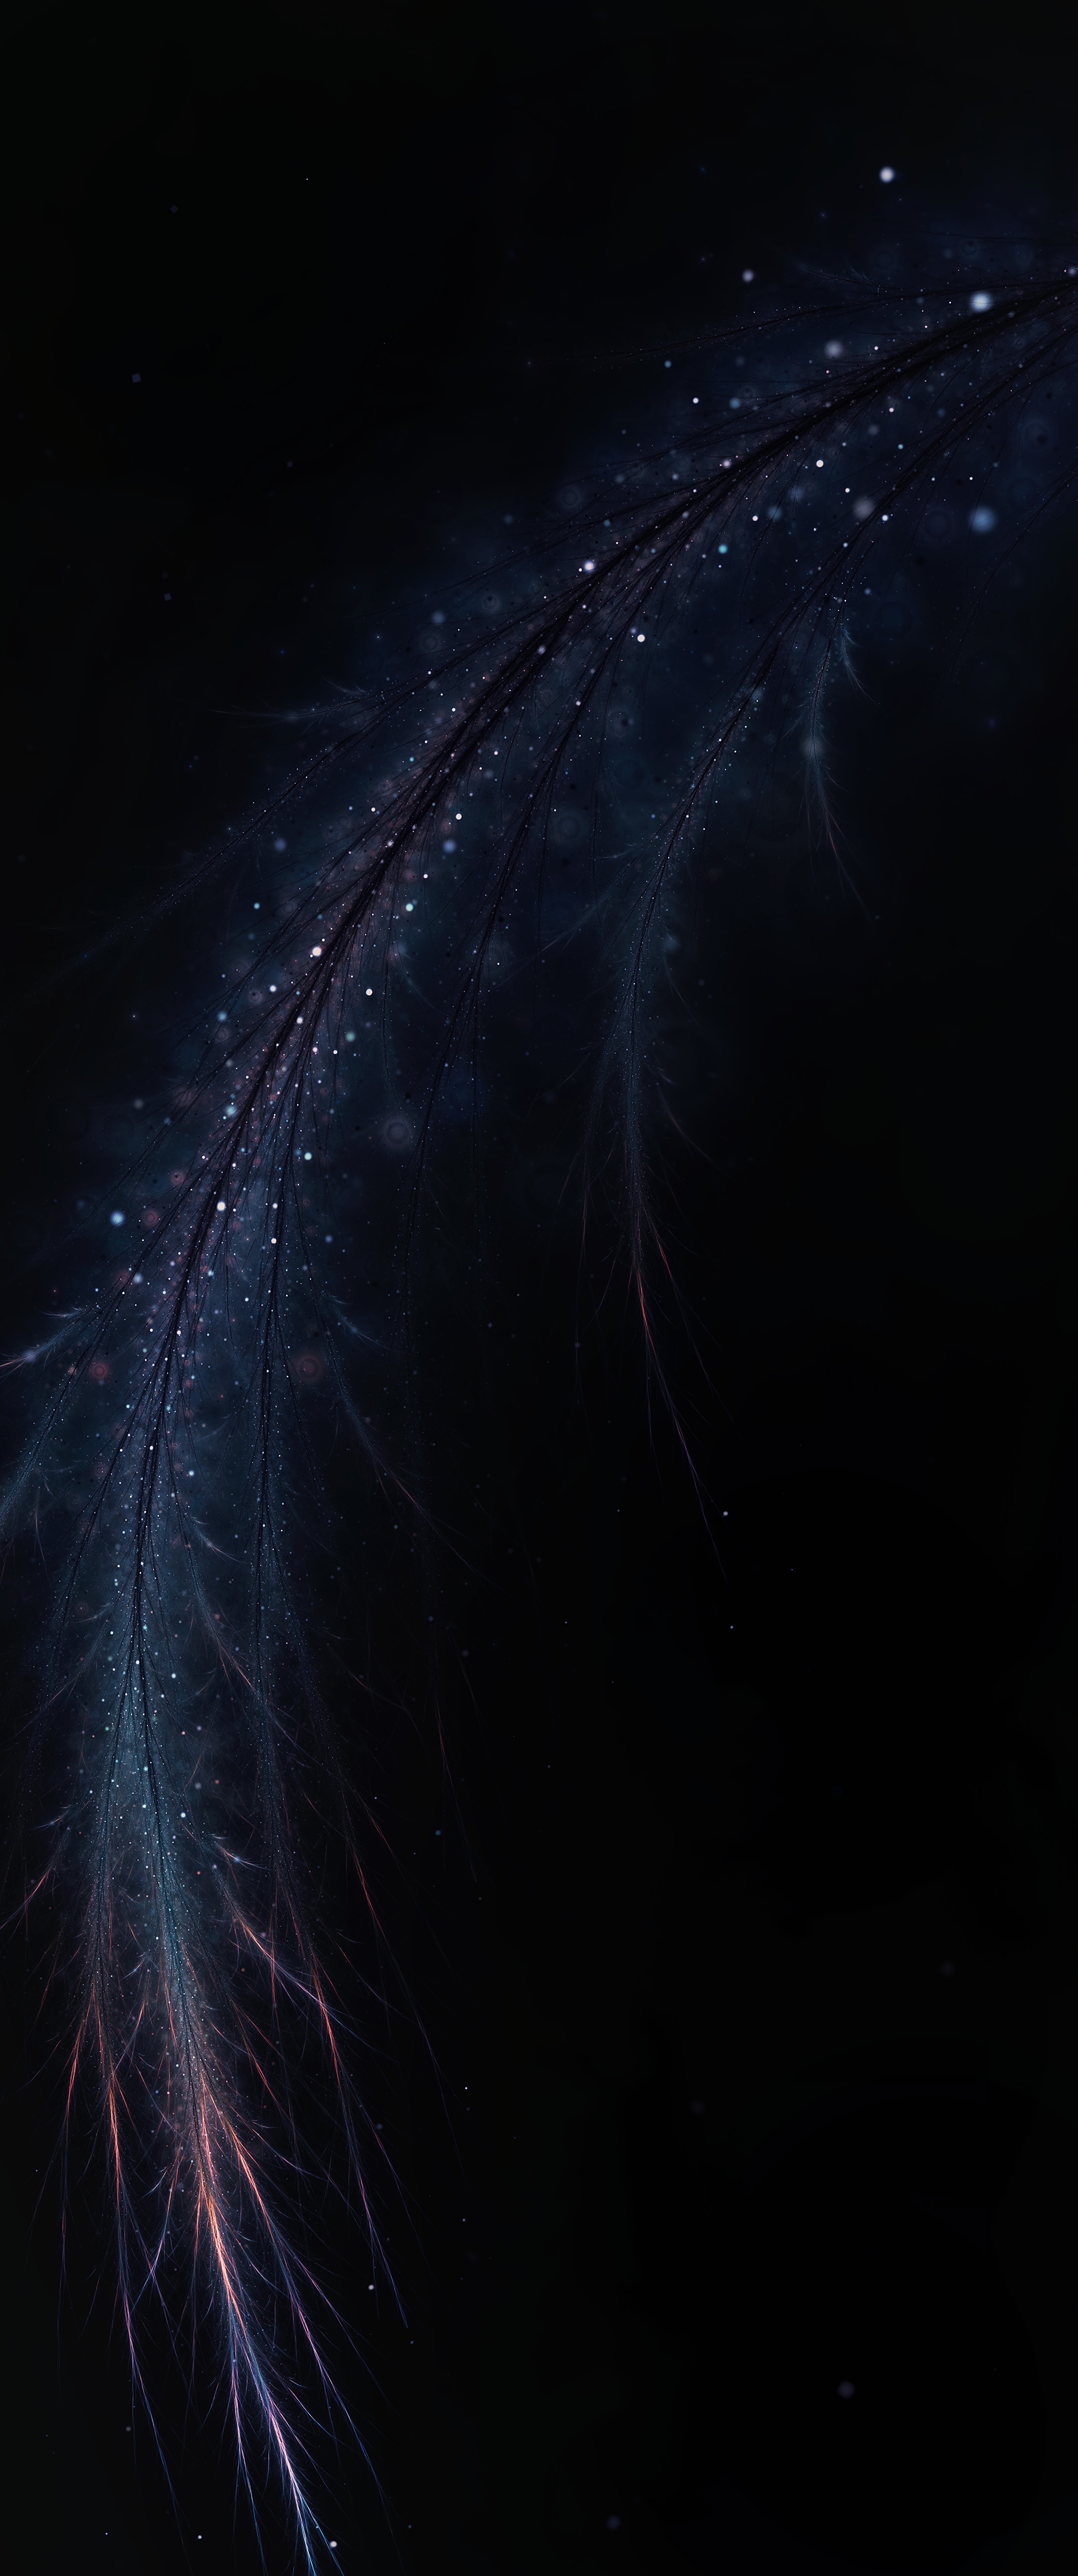 android brilliance, pen, feather, dark, abstract, branch, fractal, shine